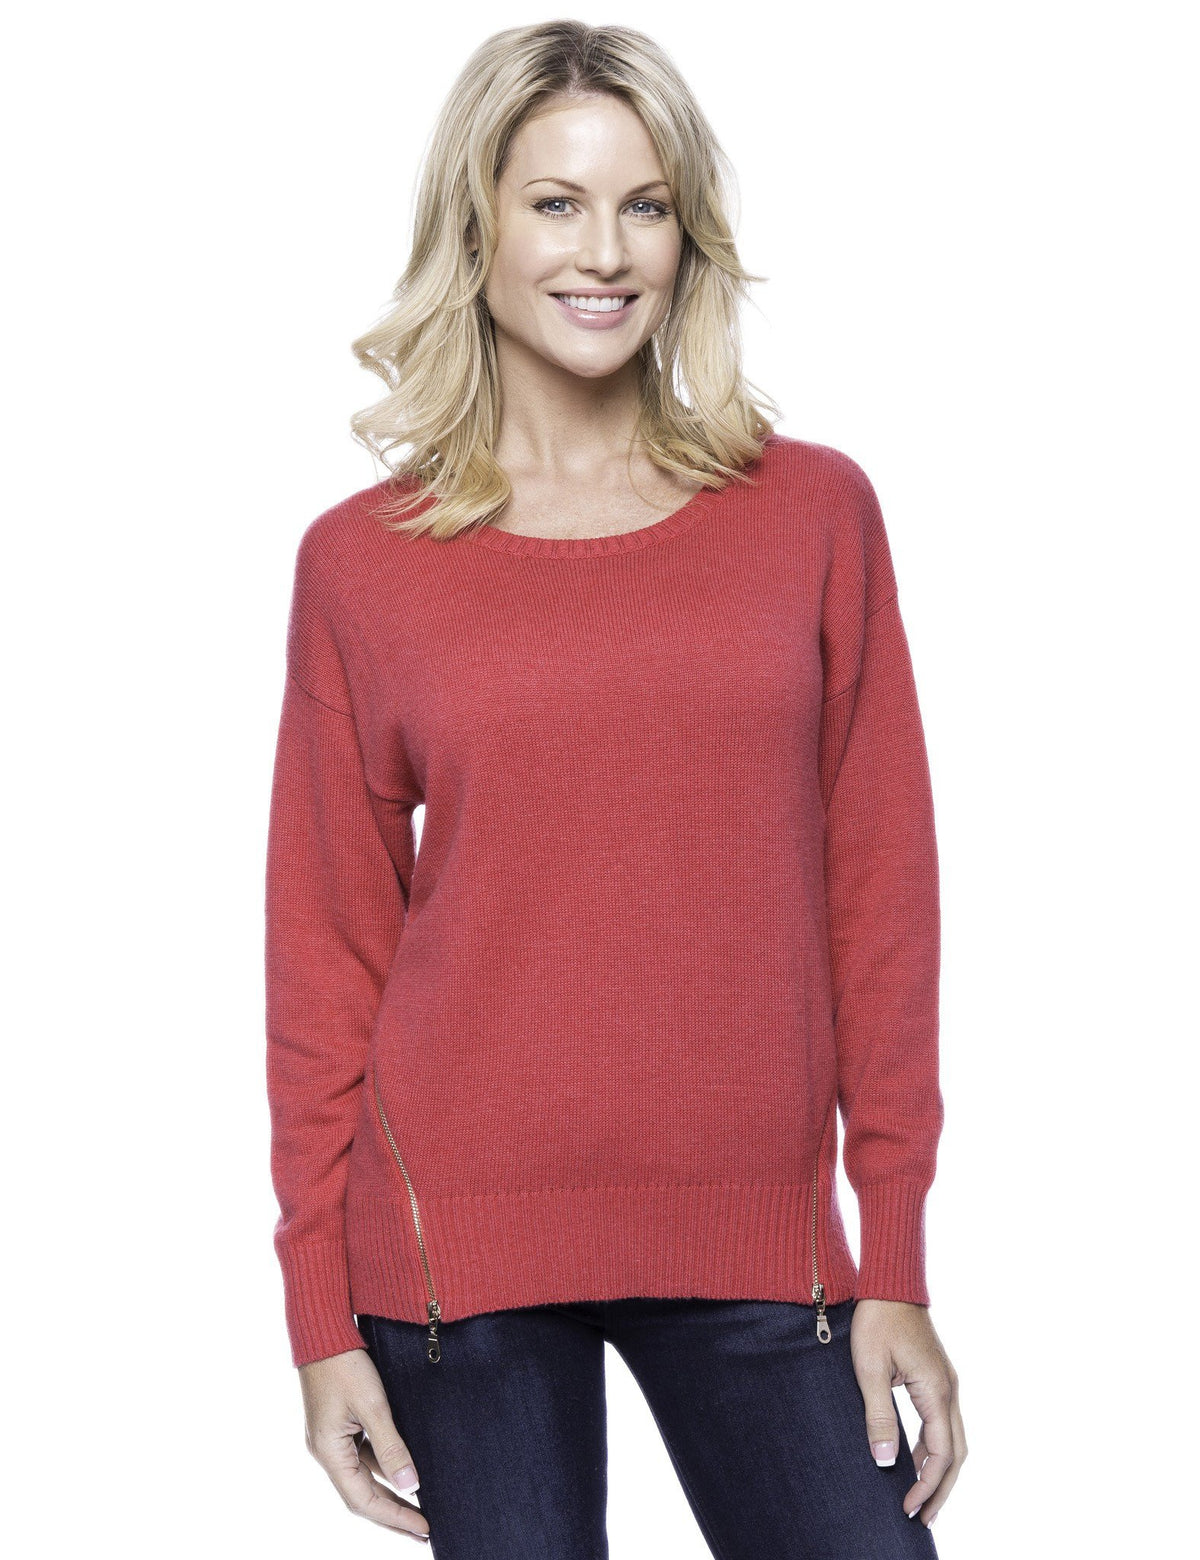 Women's Cashmere Blend Crew Neck Sweater with Side Zip - Fuchsia